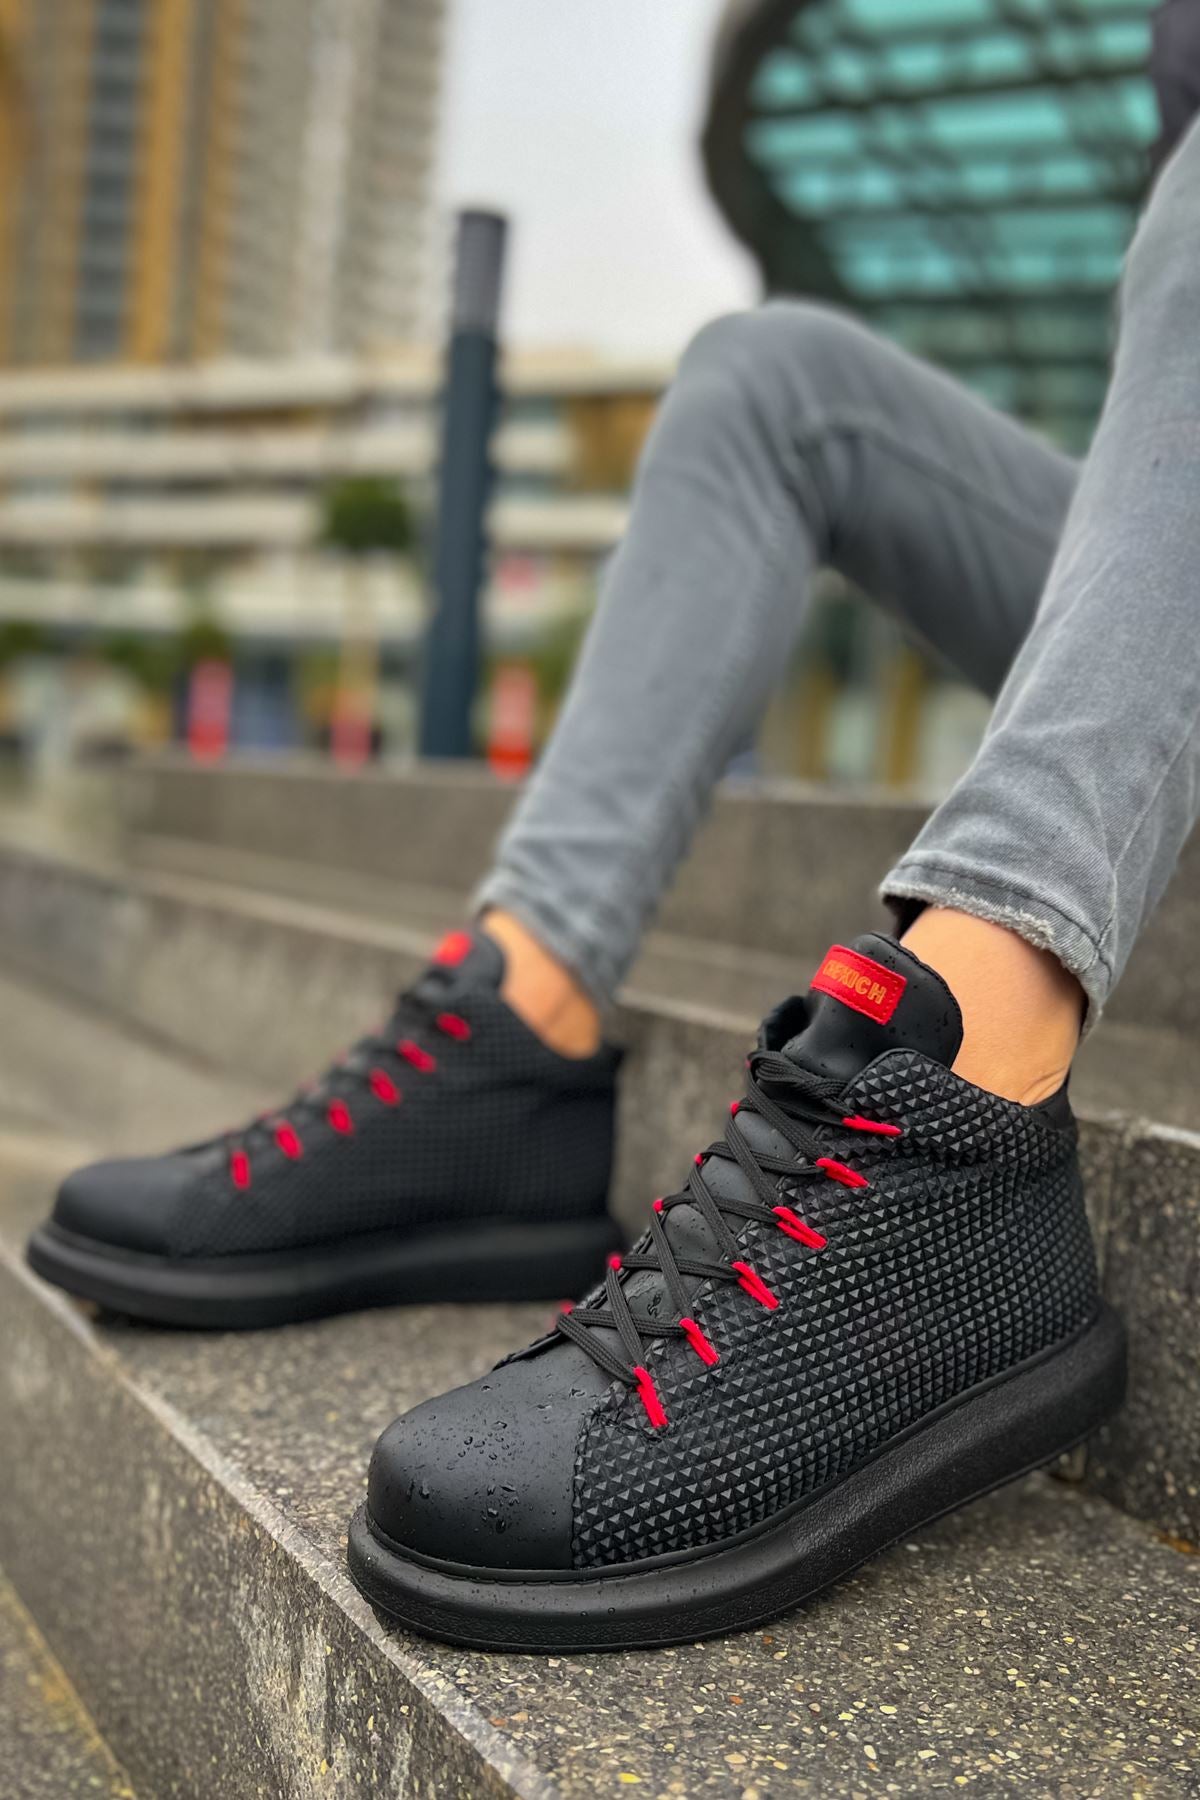 CH111 Garni ST BLACK/RED men's sneakers shoes - STREETMODE ™